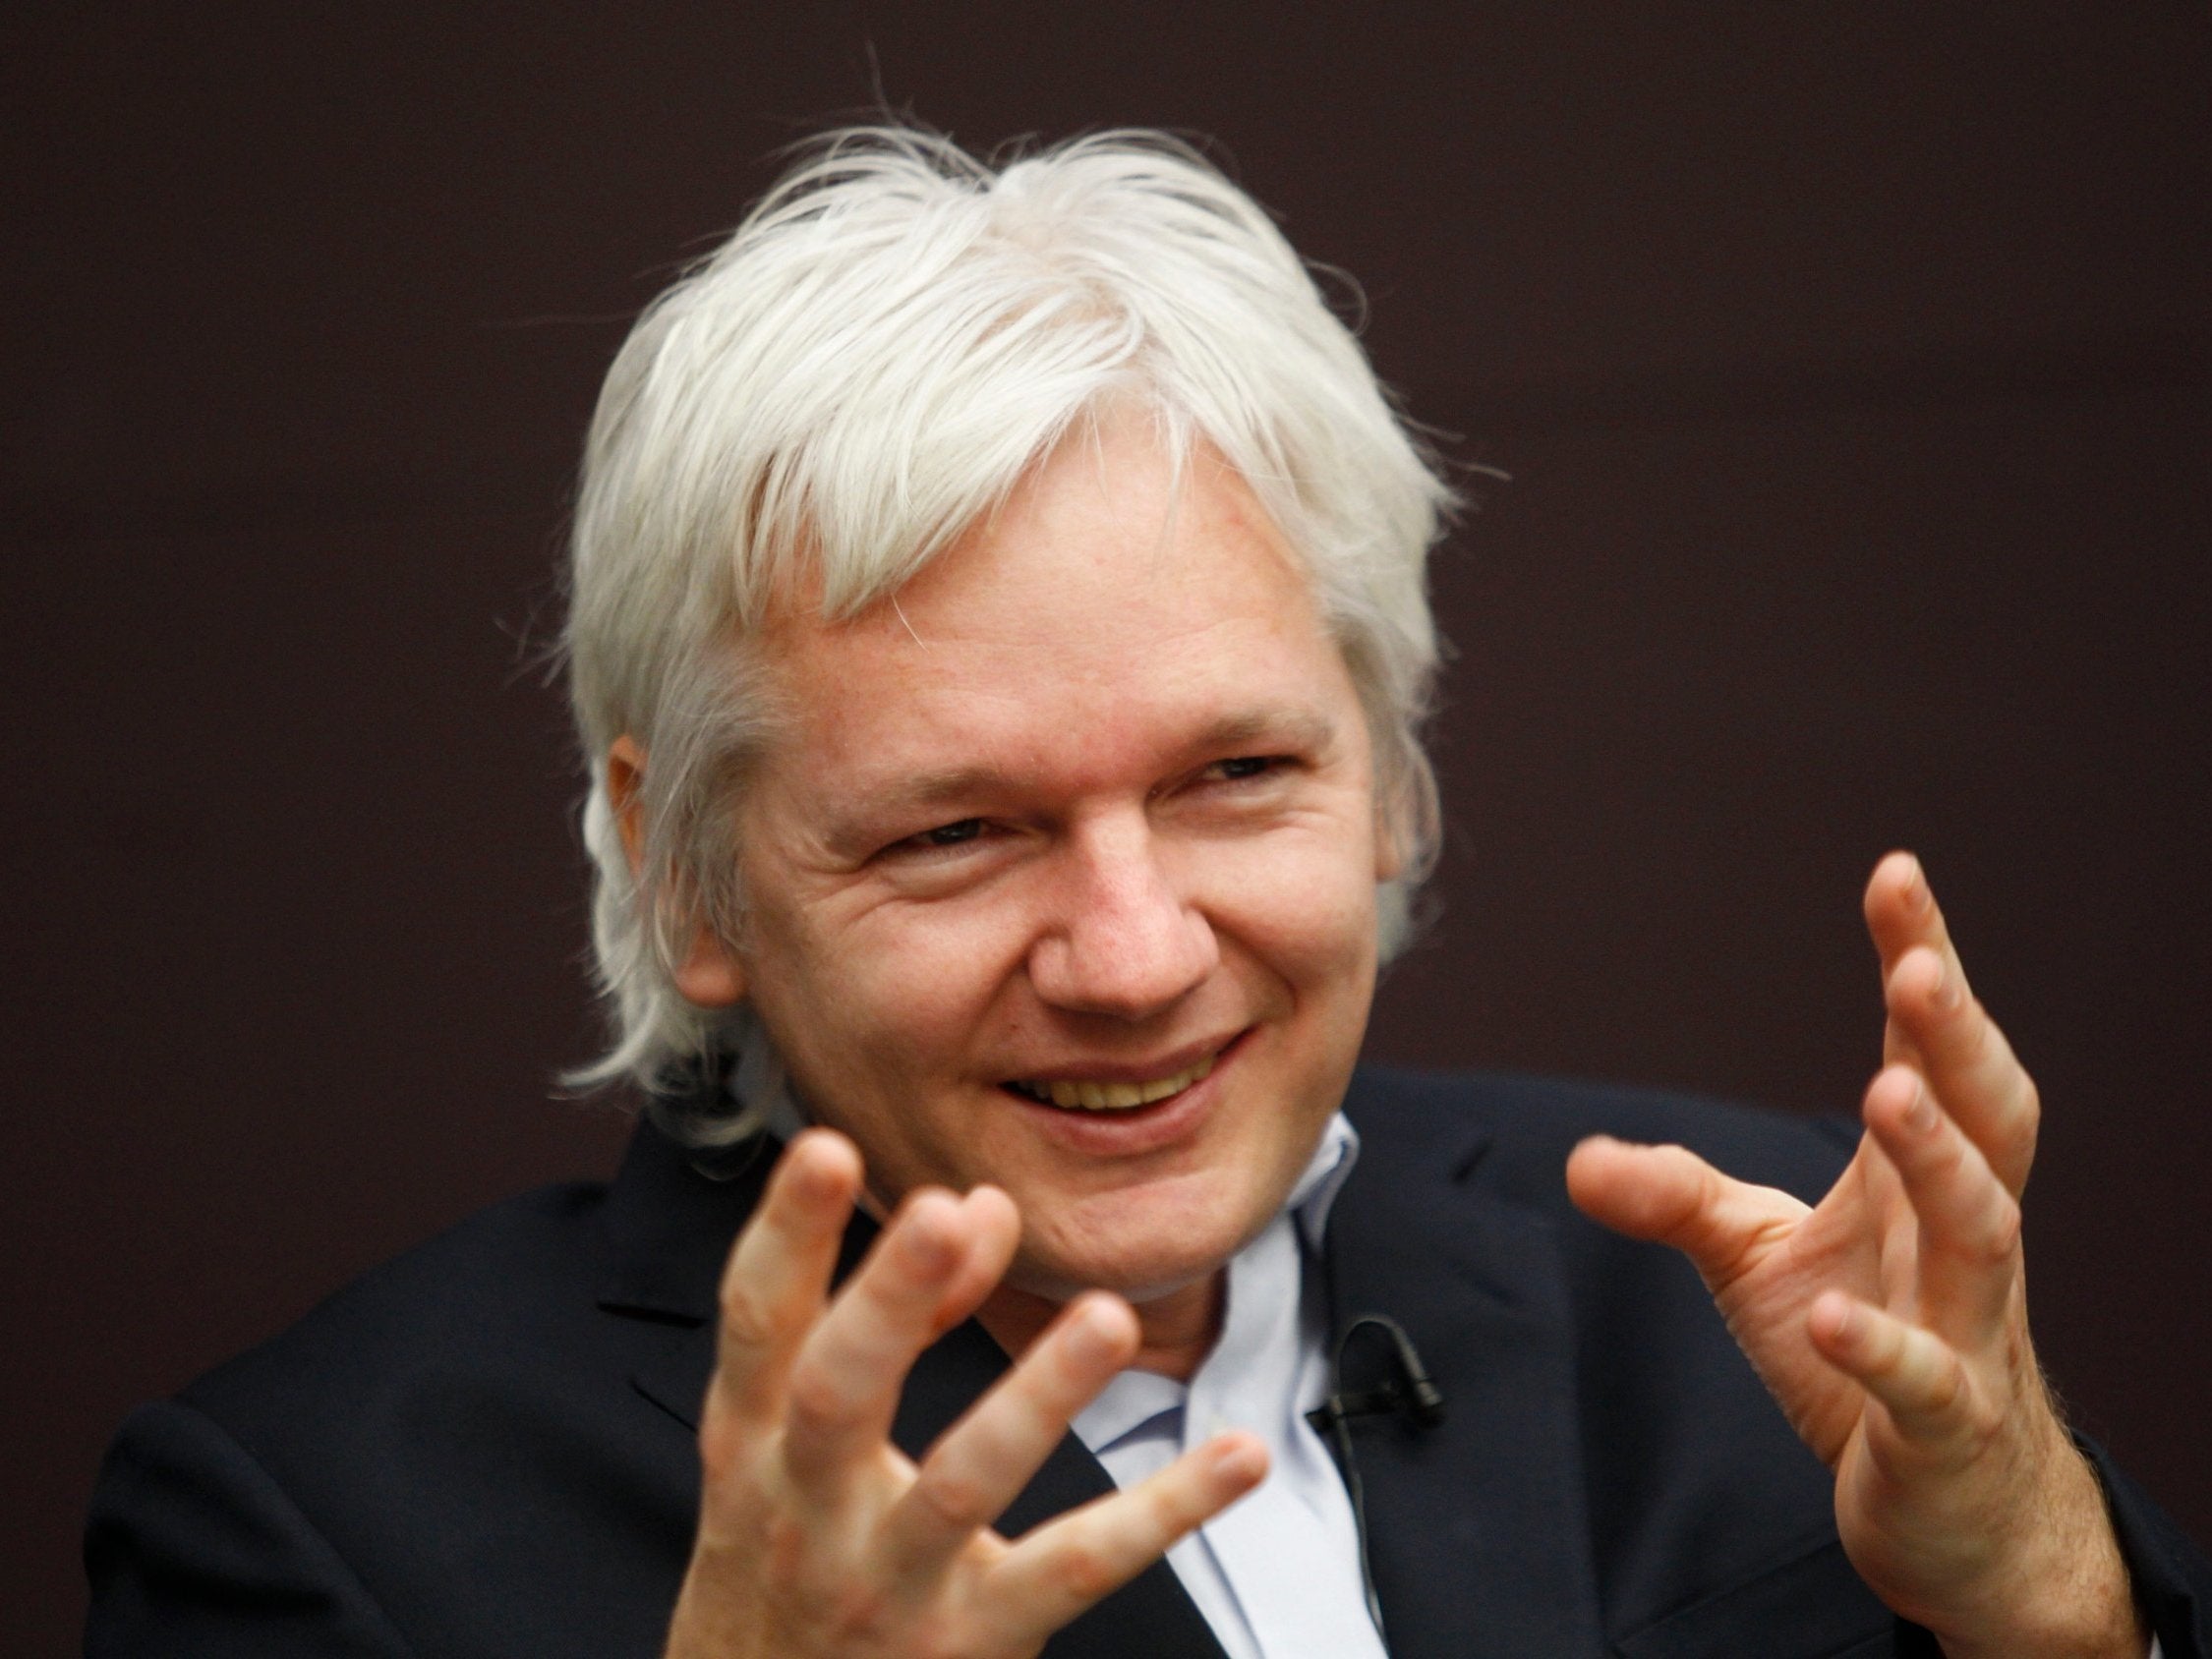 Calling Assange a 'narcissist' misses the point – without WikiLeaks we would live in darker, less informed times